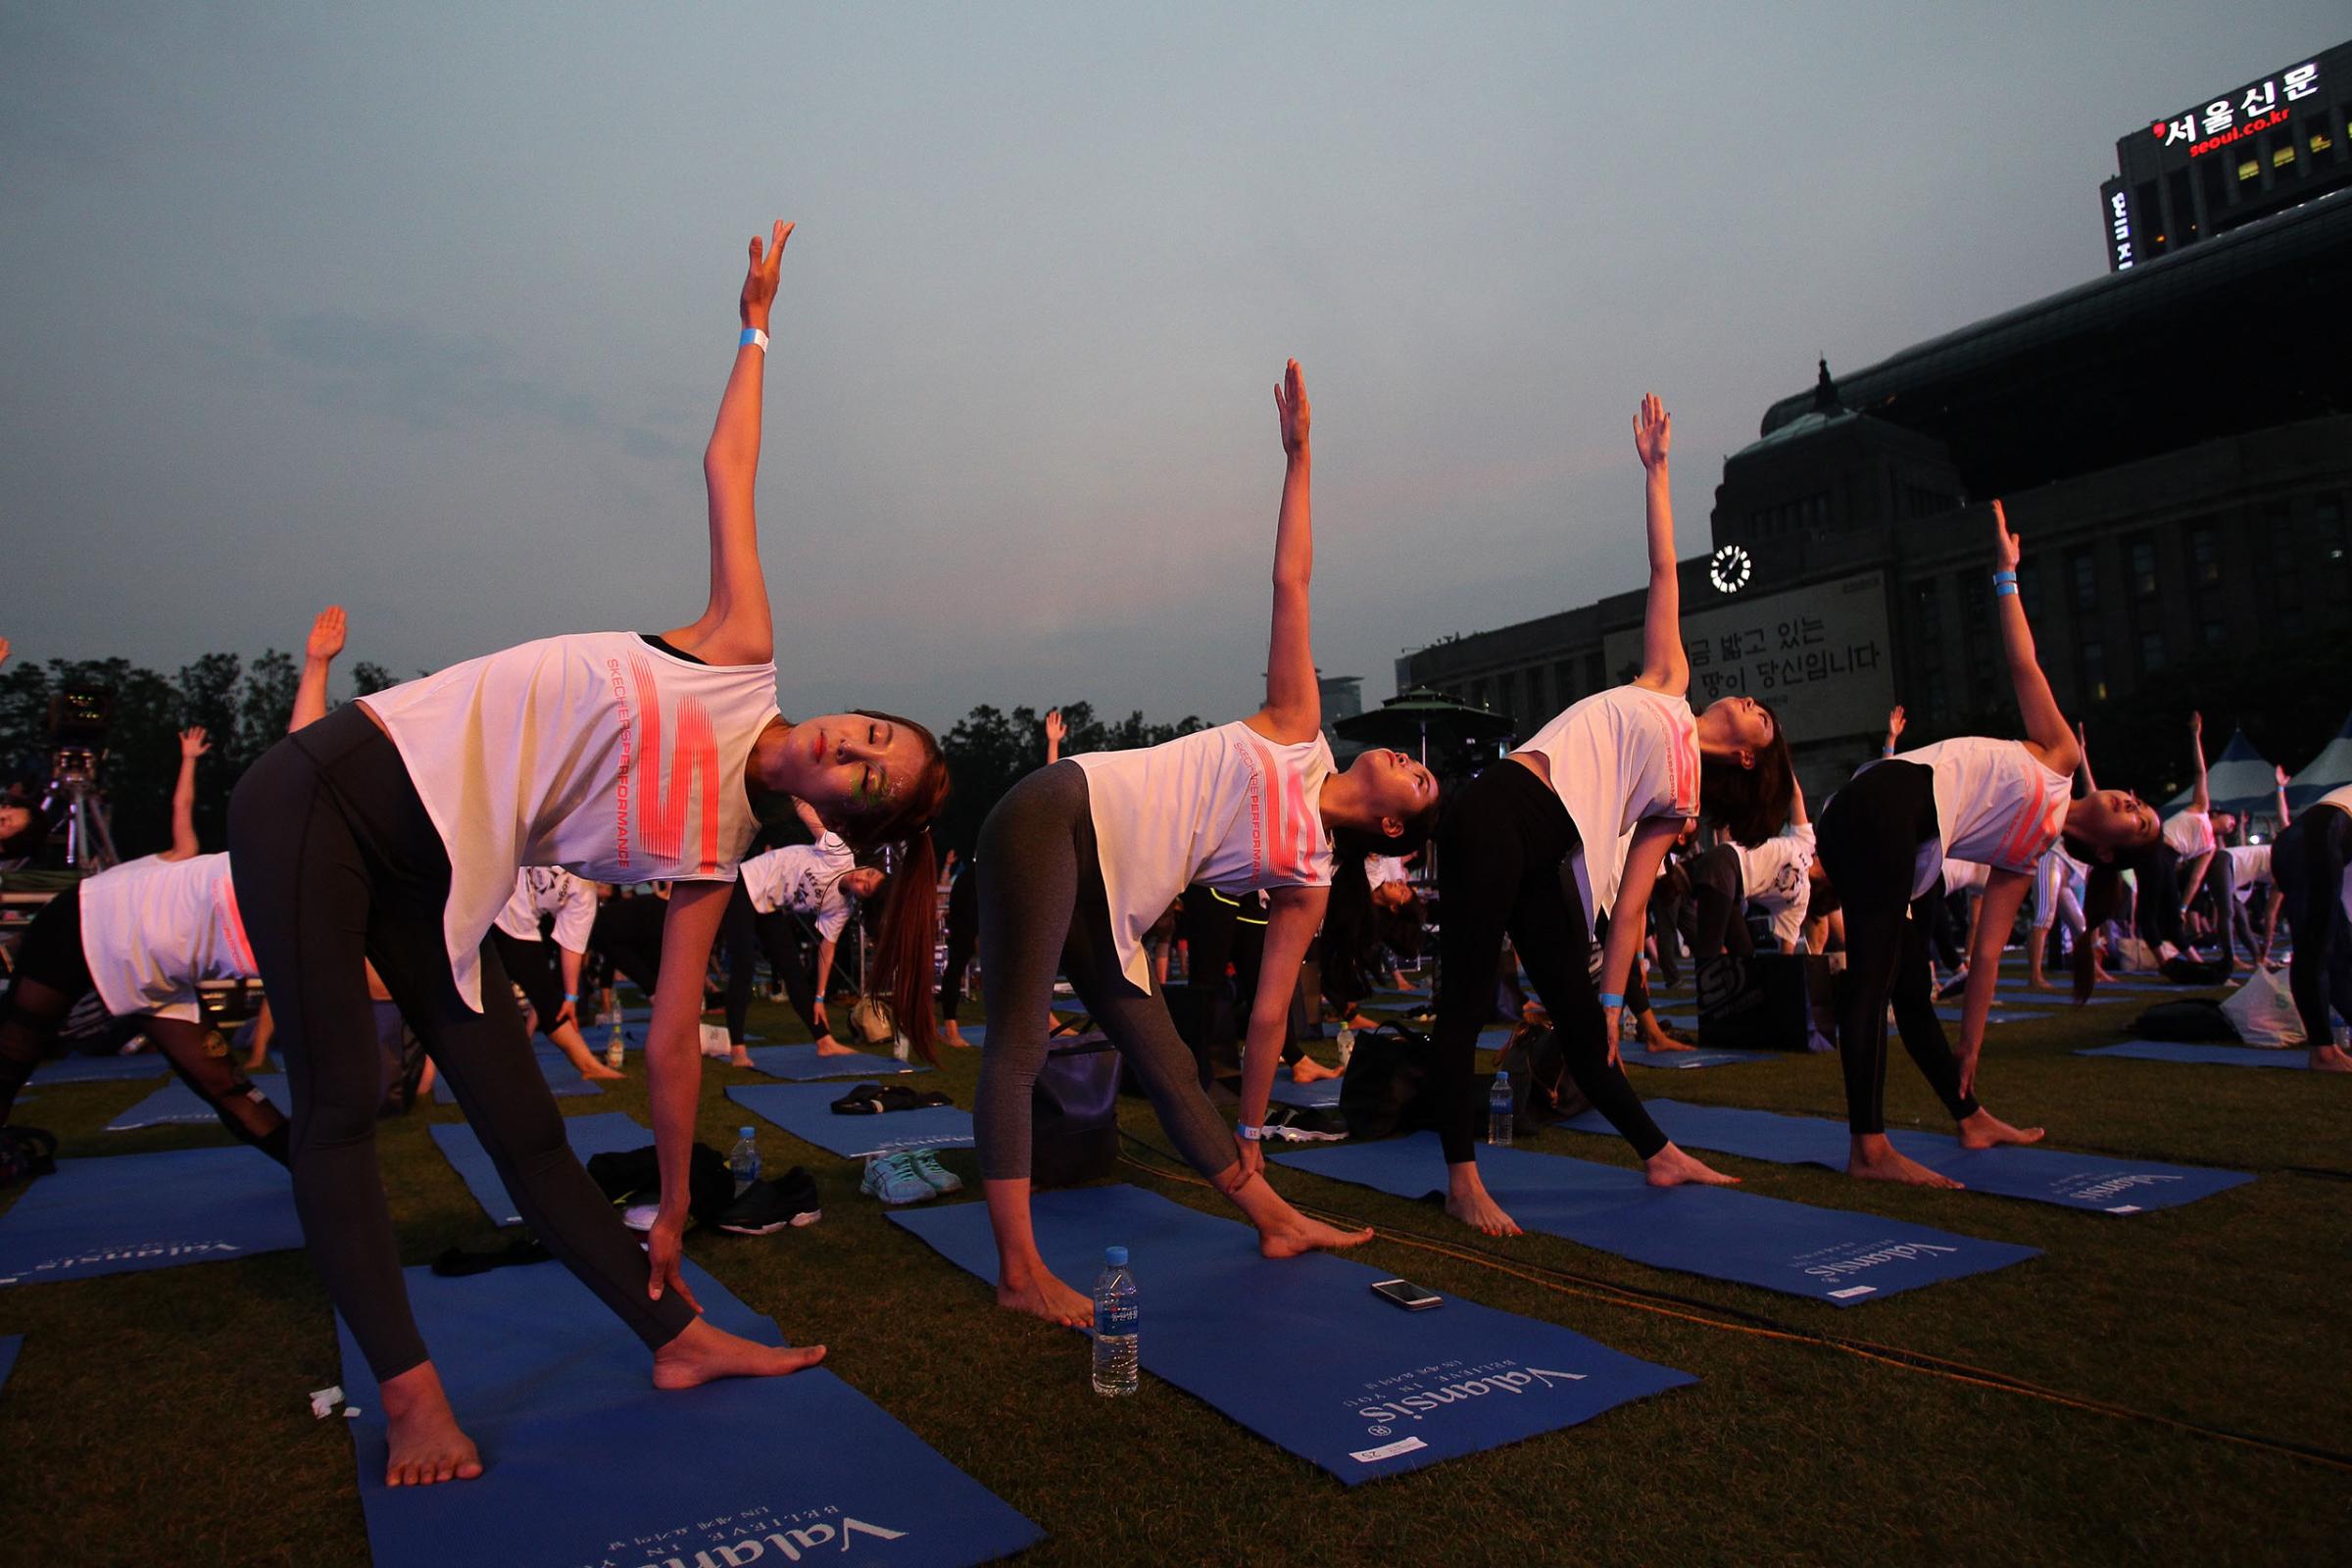 People perform yoga to mark International Day of Yoga in Seoul, South Korea, on June 21, 2016.